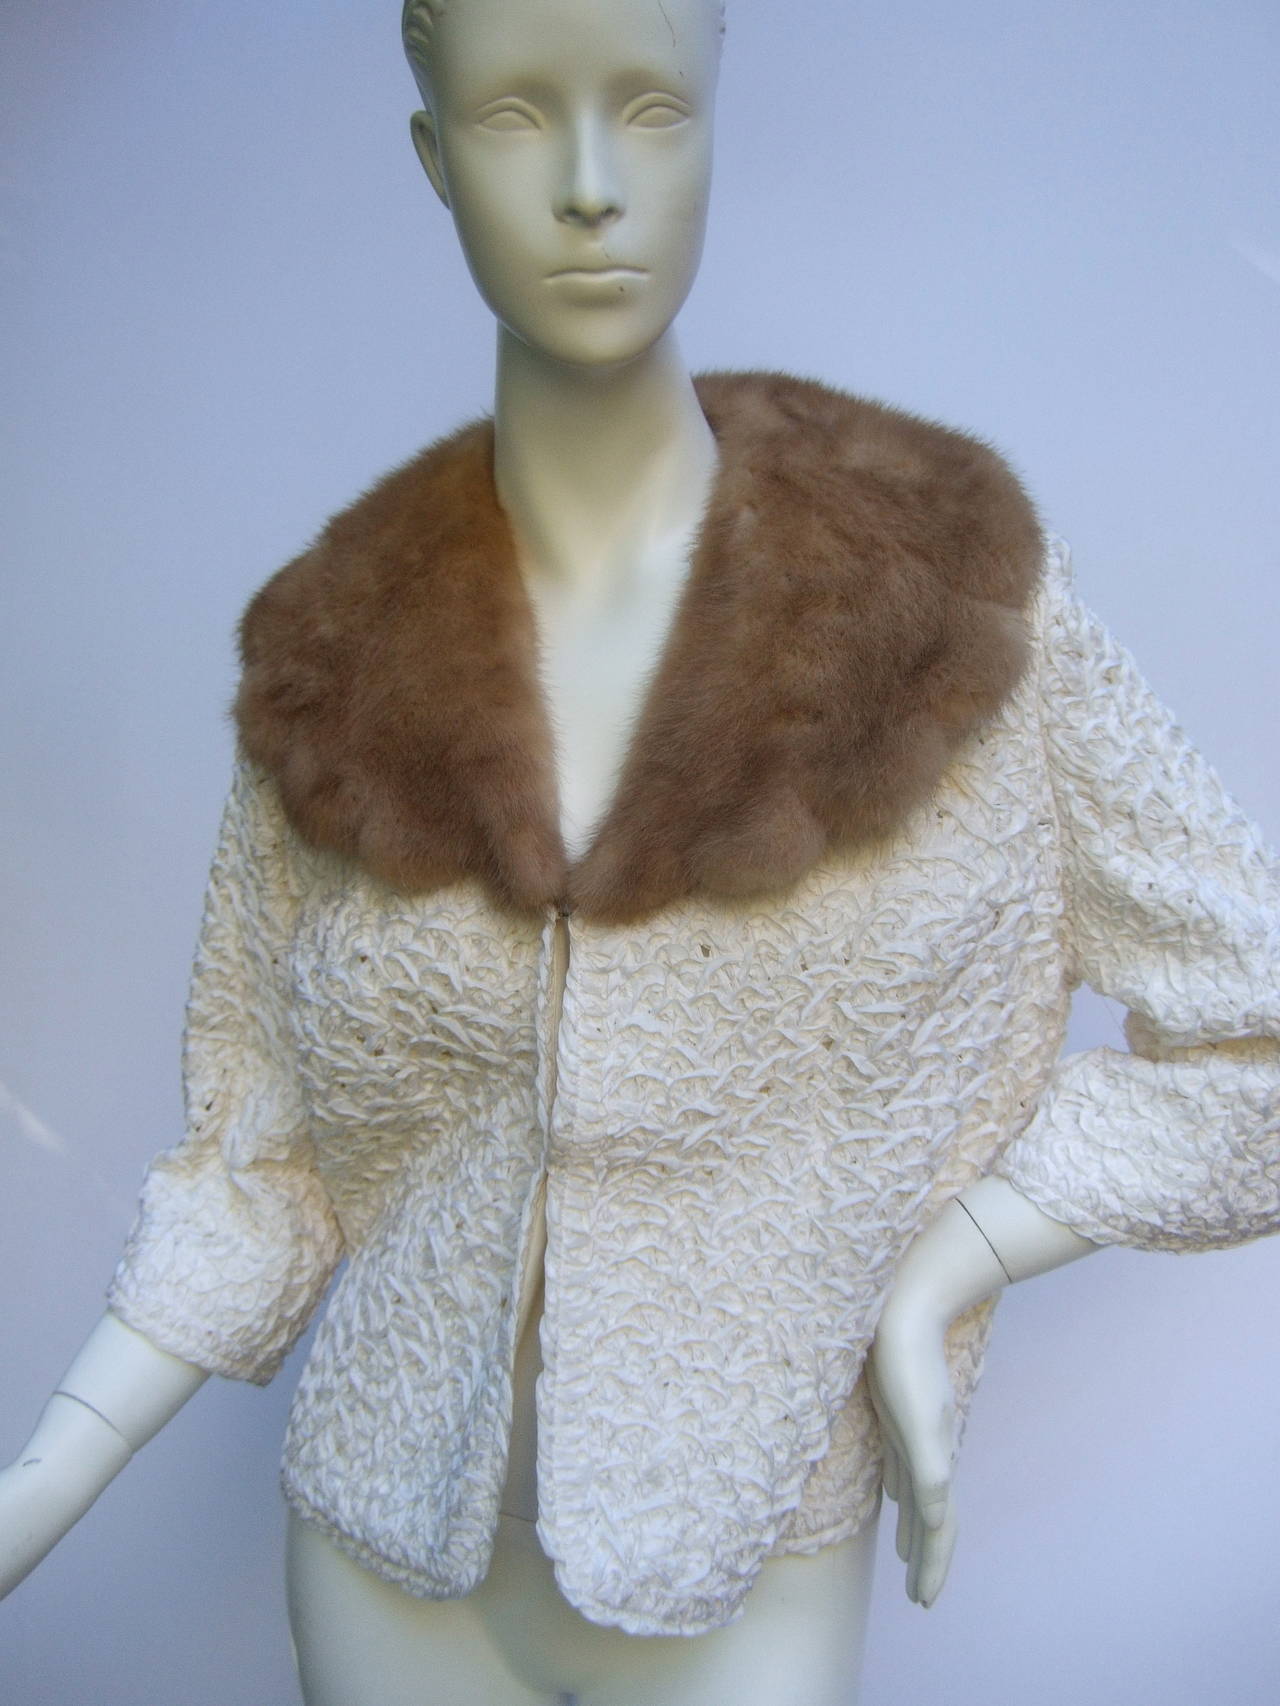 Mink collar white ribbon jacket c 1960
The chic retro ribbon jacket is designed with a wide dramatic scalloped mink collar. The elegant jacket is constructed with intricate looped satin ribbons
The back hemline & cuffs are designed with a subtle